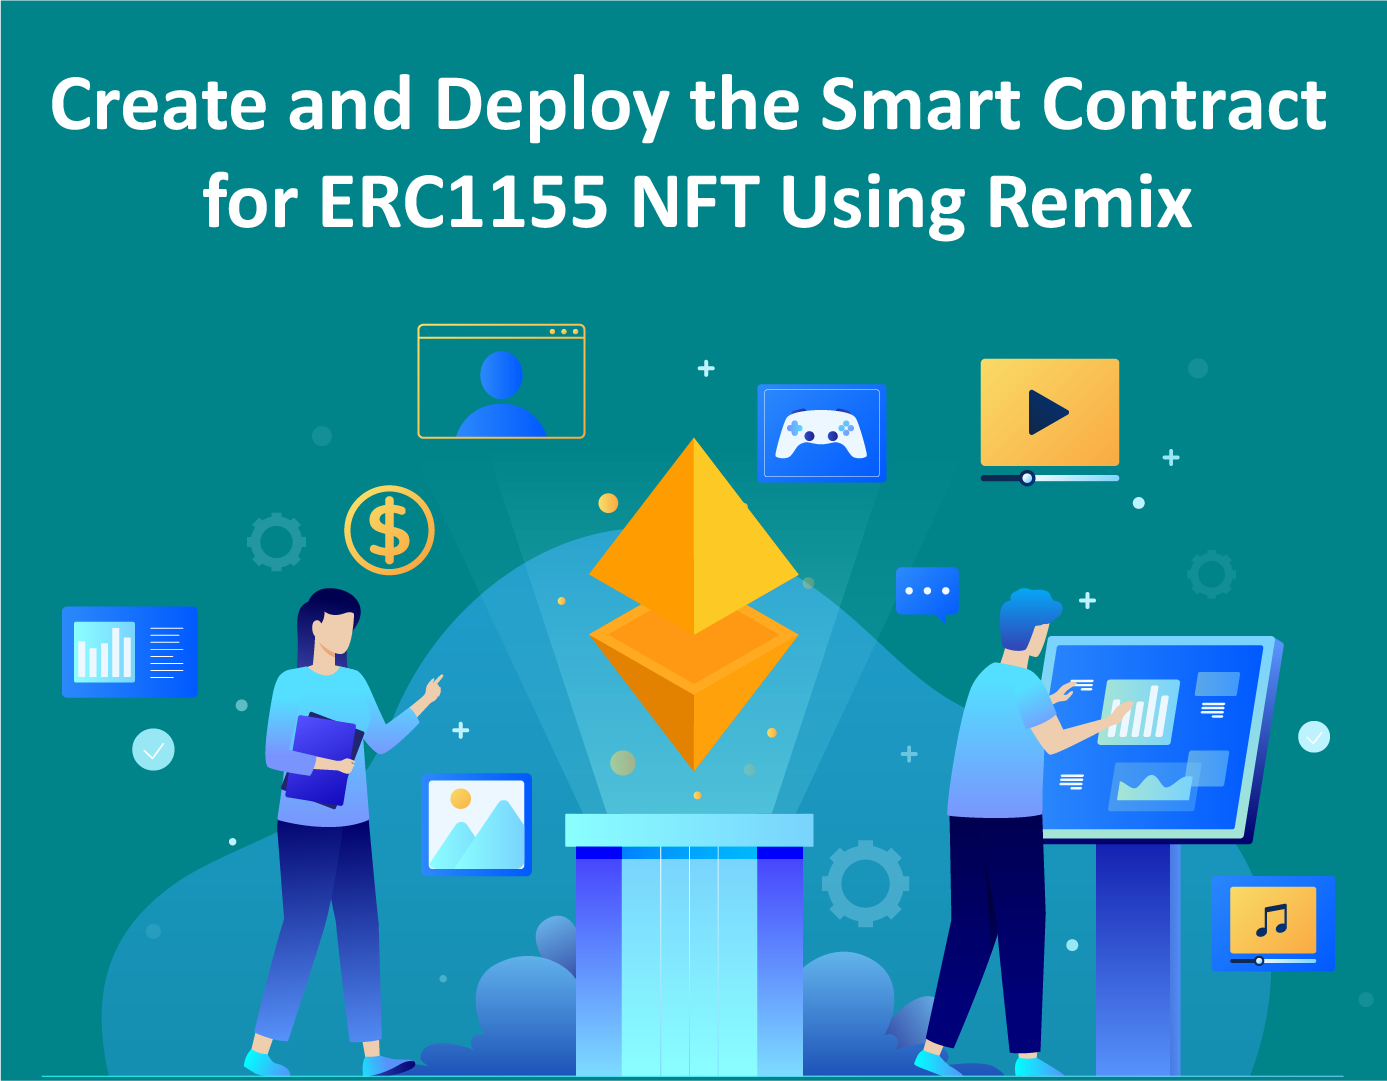 Create and Deploy the Smart Contract for ERC1155 NFT Using Remix